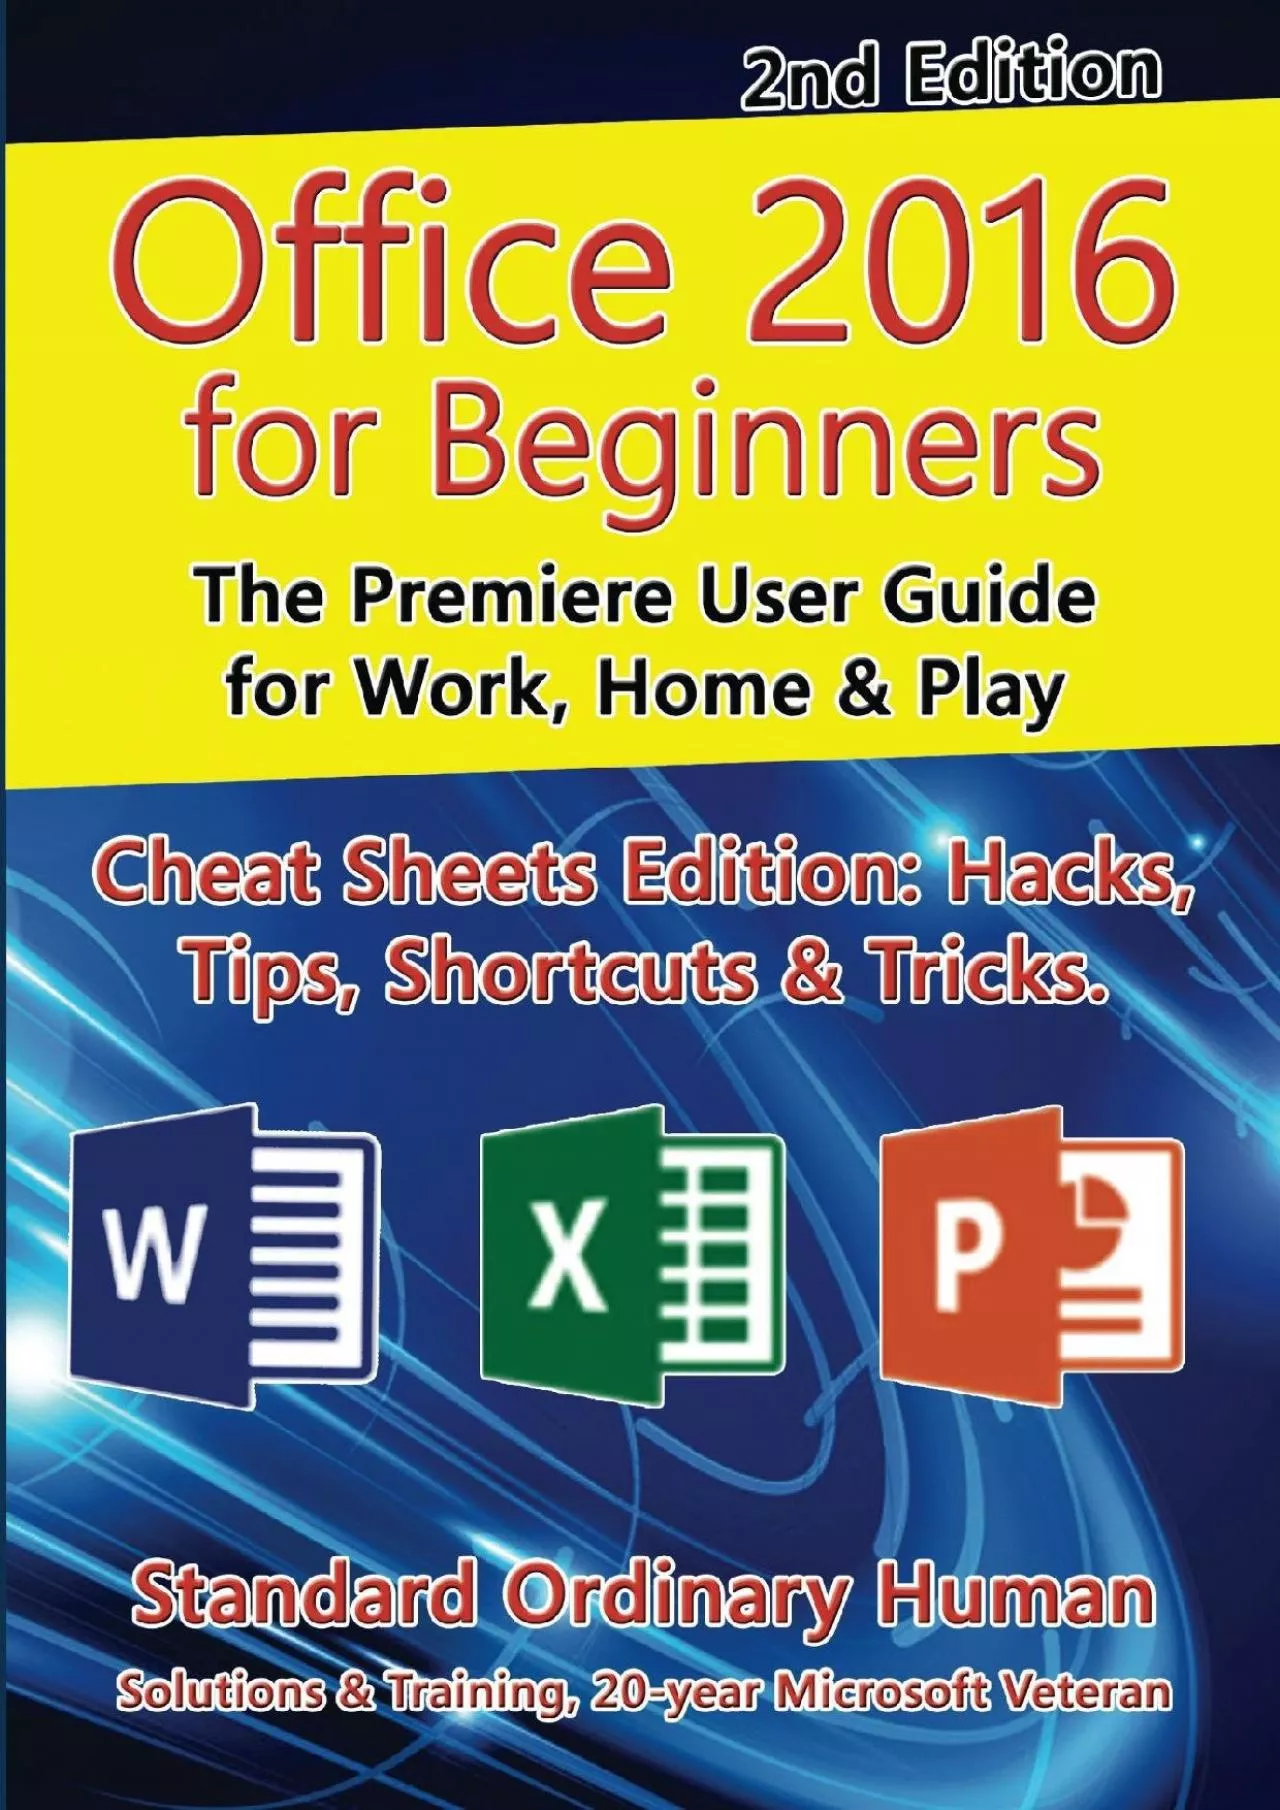 (BOOS)-Office 2016 for Beginners, 2nd Edition. The Premiere User Guide for Work, Home